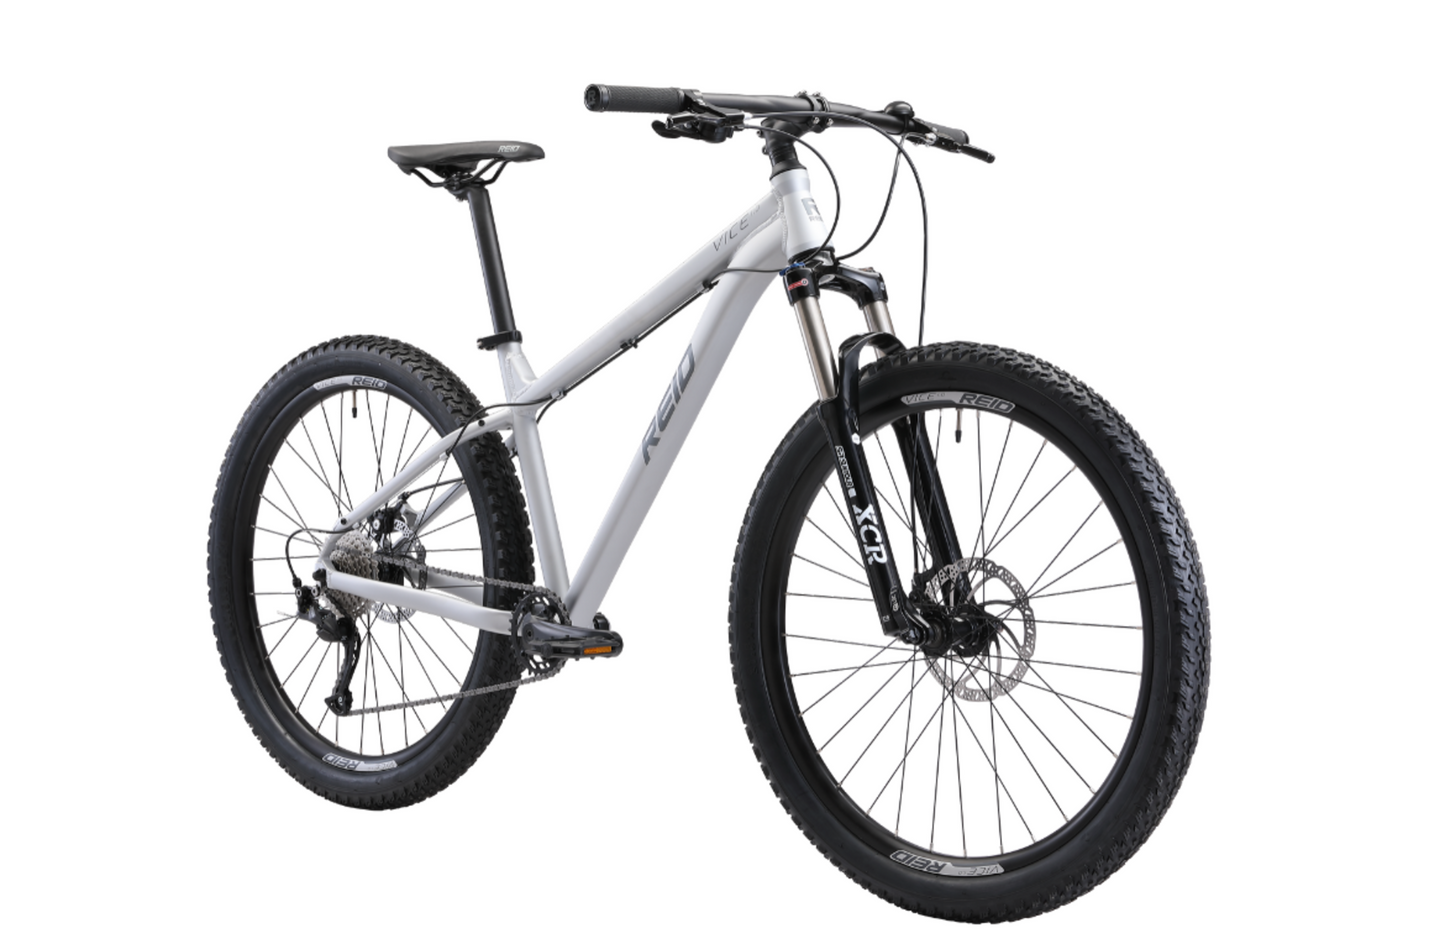 Vice 1.0 Mountain Bike in Grey showing Suntour forks from Reid Cycles Australia 